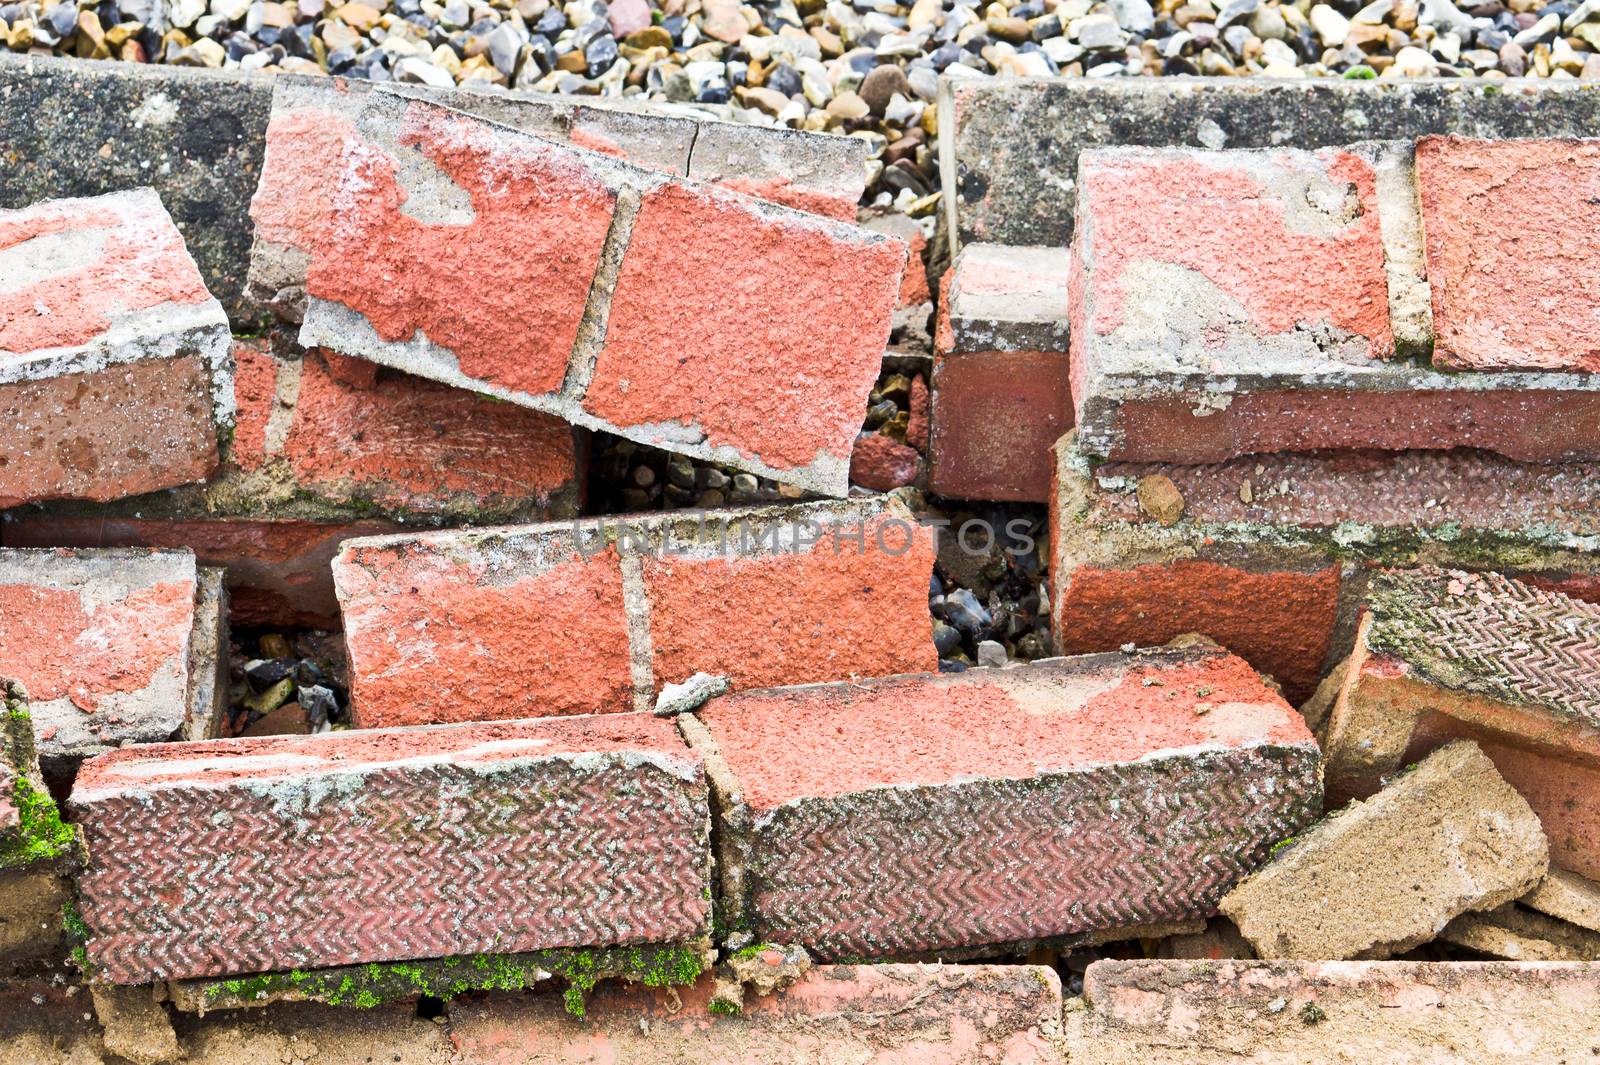 Pile of bricks from a collapsed wall